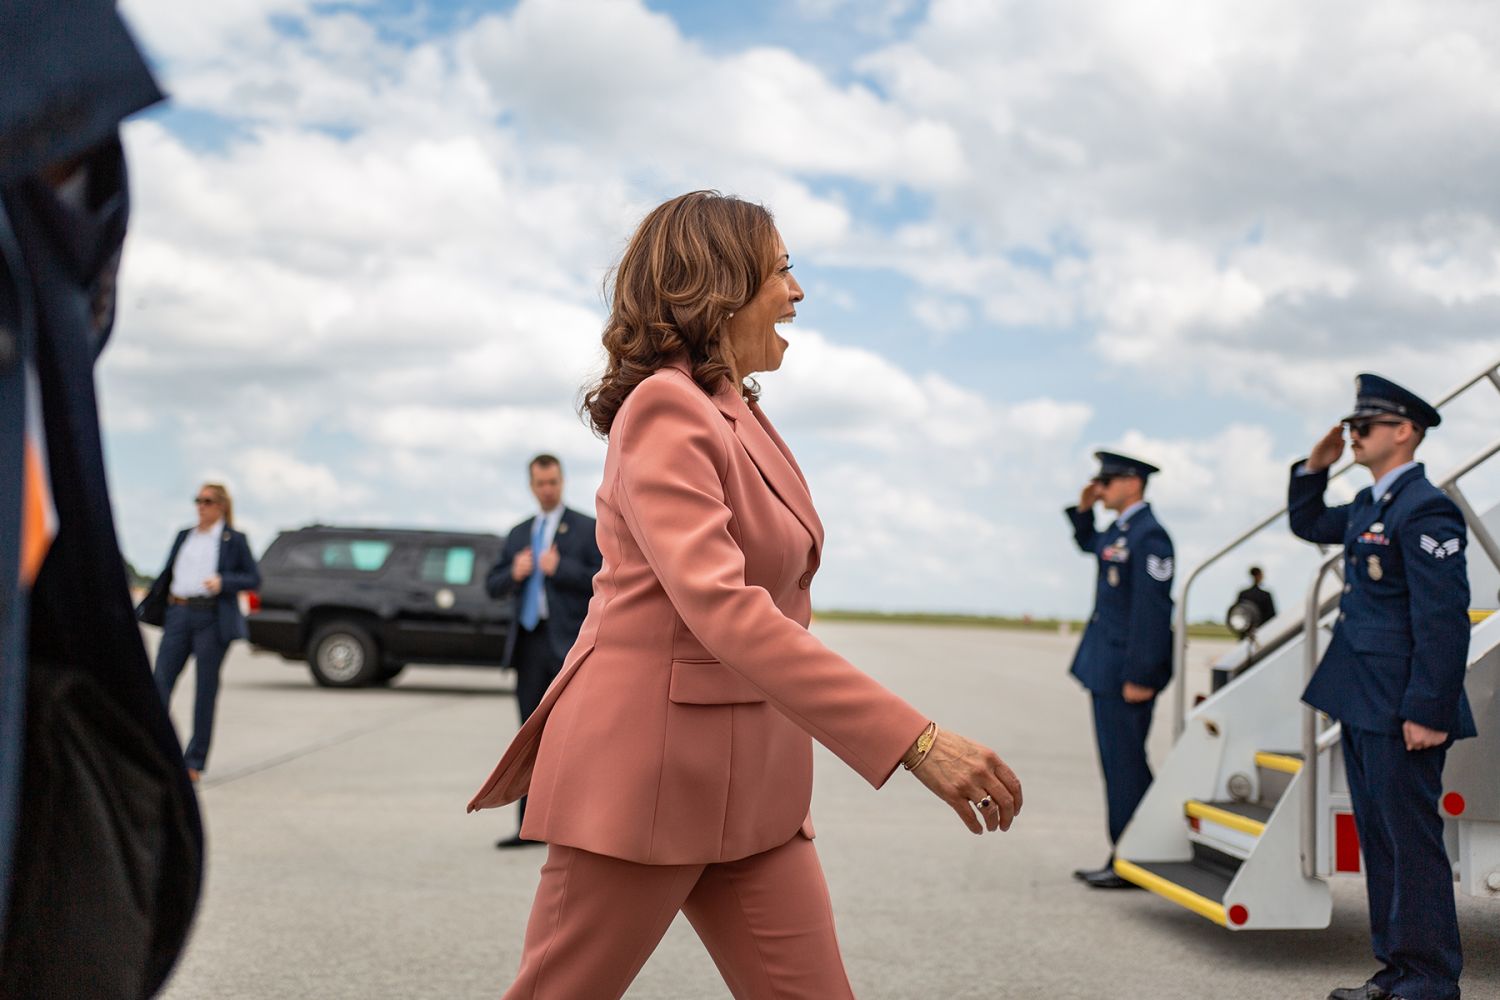 <p>In the spring of 2024, Flo Ngala was asked to photograph Vice President Kamala Harris, as part of a Rolling Stone Interview featured in the July/August issue of the magazine.</p> <p>Ngala traveled to three cities with the vice president, capturing Harris’ energy and charisma as she engaged with constituents at a stop on the Nationwide Economic Opportunity Tour, and spoke at a reproductive freedom rally in Florida. Ngala also visited Harris’ residence in Washington, D.C. where the V.P. posed for a portrait dressed in a crispy ivory suit.</p> <p>“I was witnessing history,” Ngala — who like Harris, is the daughter of immigrants — said of the assignment.</p> <p>Flash forward to this past week: President Joe Biden dropped out of the 2024 race and enthusiastically endorsed Vice President Harris to take his place, changing the dynamics of the presidential race and putting Harris in position to potentially be the first woman U.S. president.</p> <p>In her first speech following the news, Harris echoed remarks from her interview with Rolling Stone‘s Alex Morris: “What kind of country do we want to live in: A country of freedom, compassion, and rule of law? Or a country of chaos, fear, and hate?”</p> <p>Photos by Flo Ngala</p>